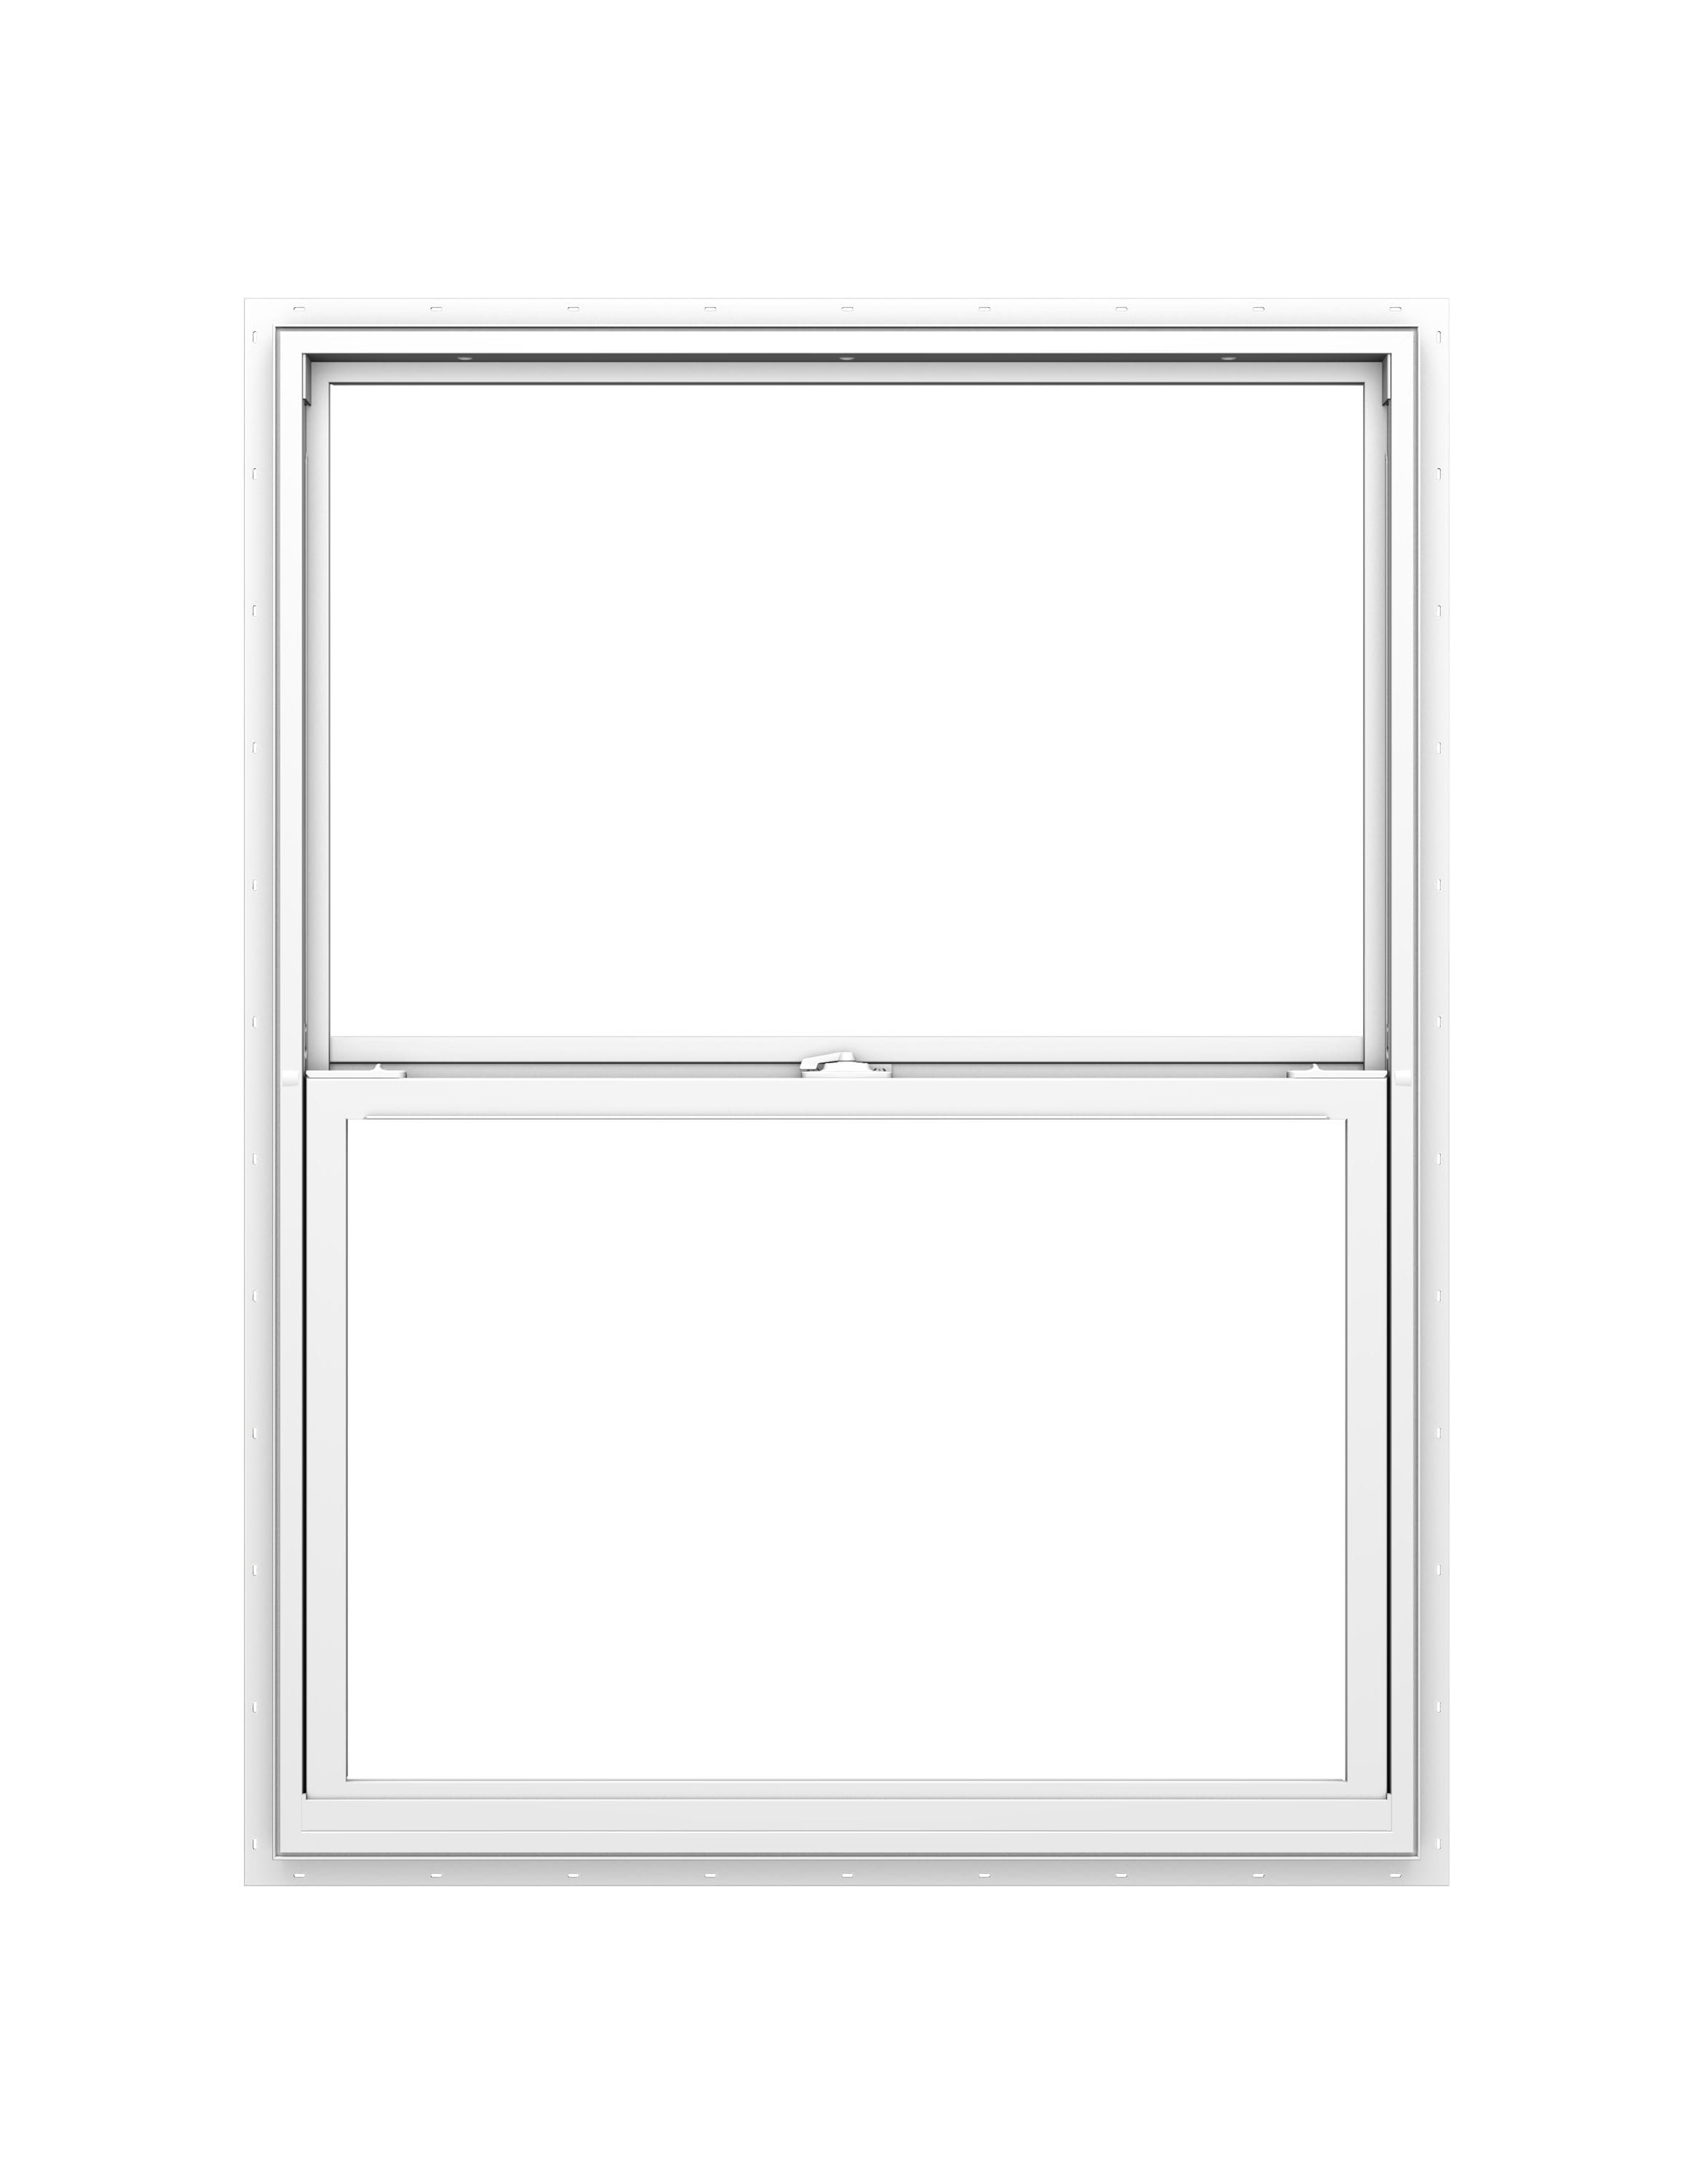 150 Series New Construction 23.5-in x 35.5-in x 2.6875-in Jamb White Vinyl Dual-pane Single Hung Window Half Screen Included | - Pella 1000010021